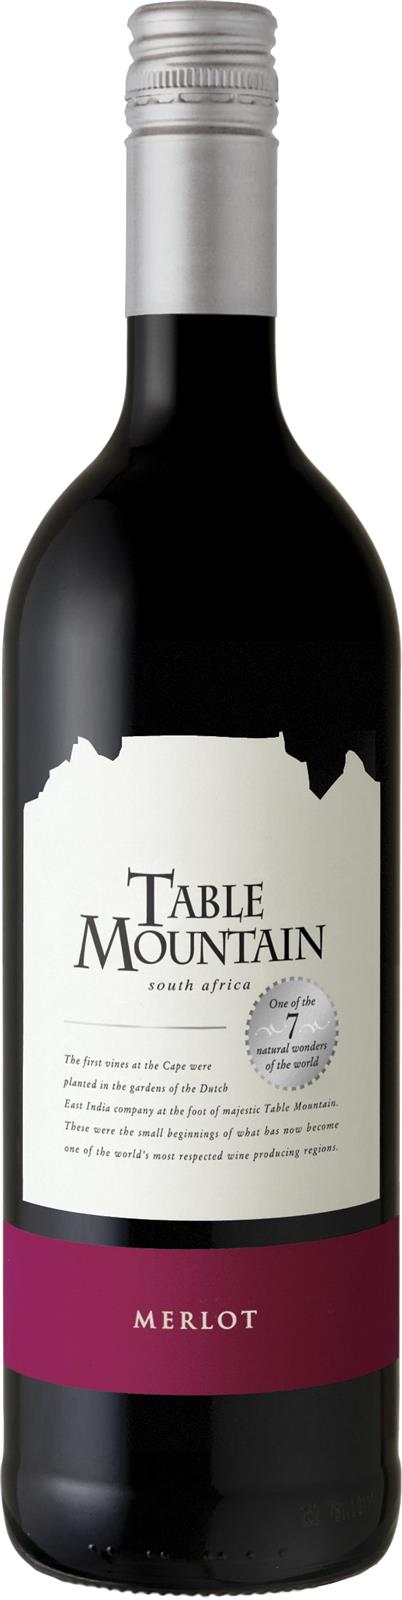 Table Mountain Western Cape Merlot 2020 (South Africa)